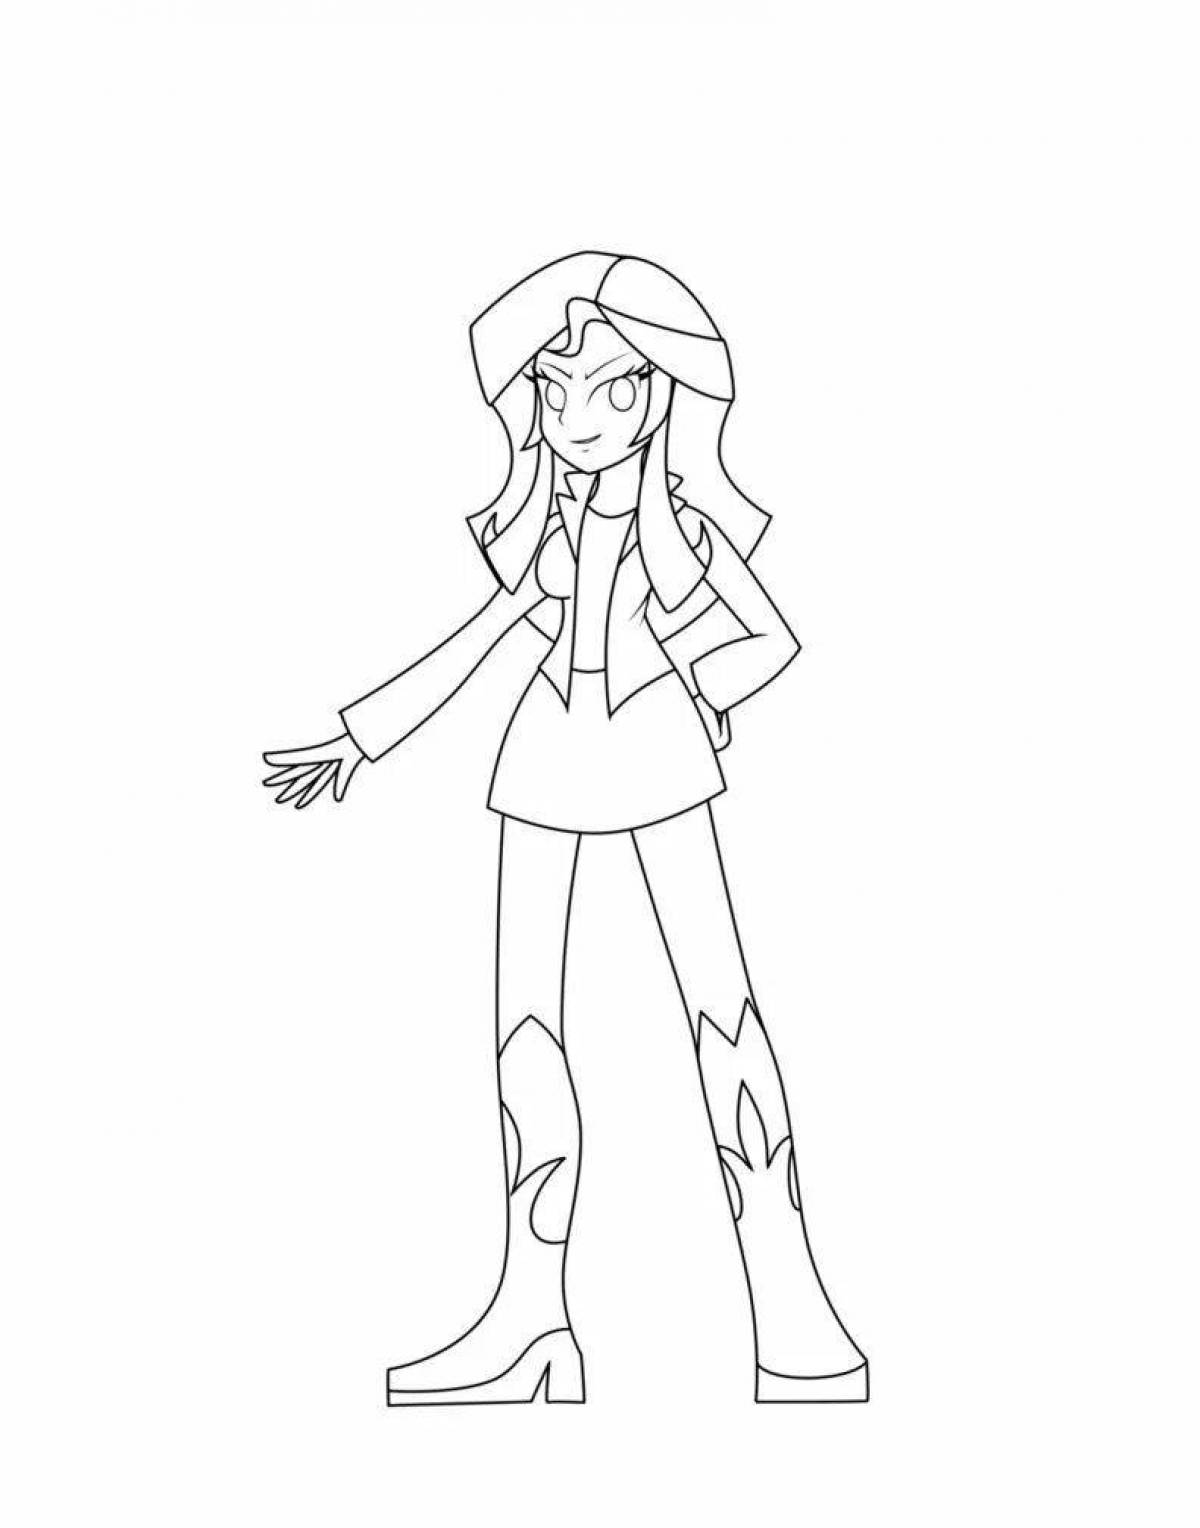 Adorable sunset shimmer coloring page